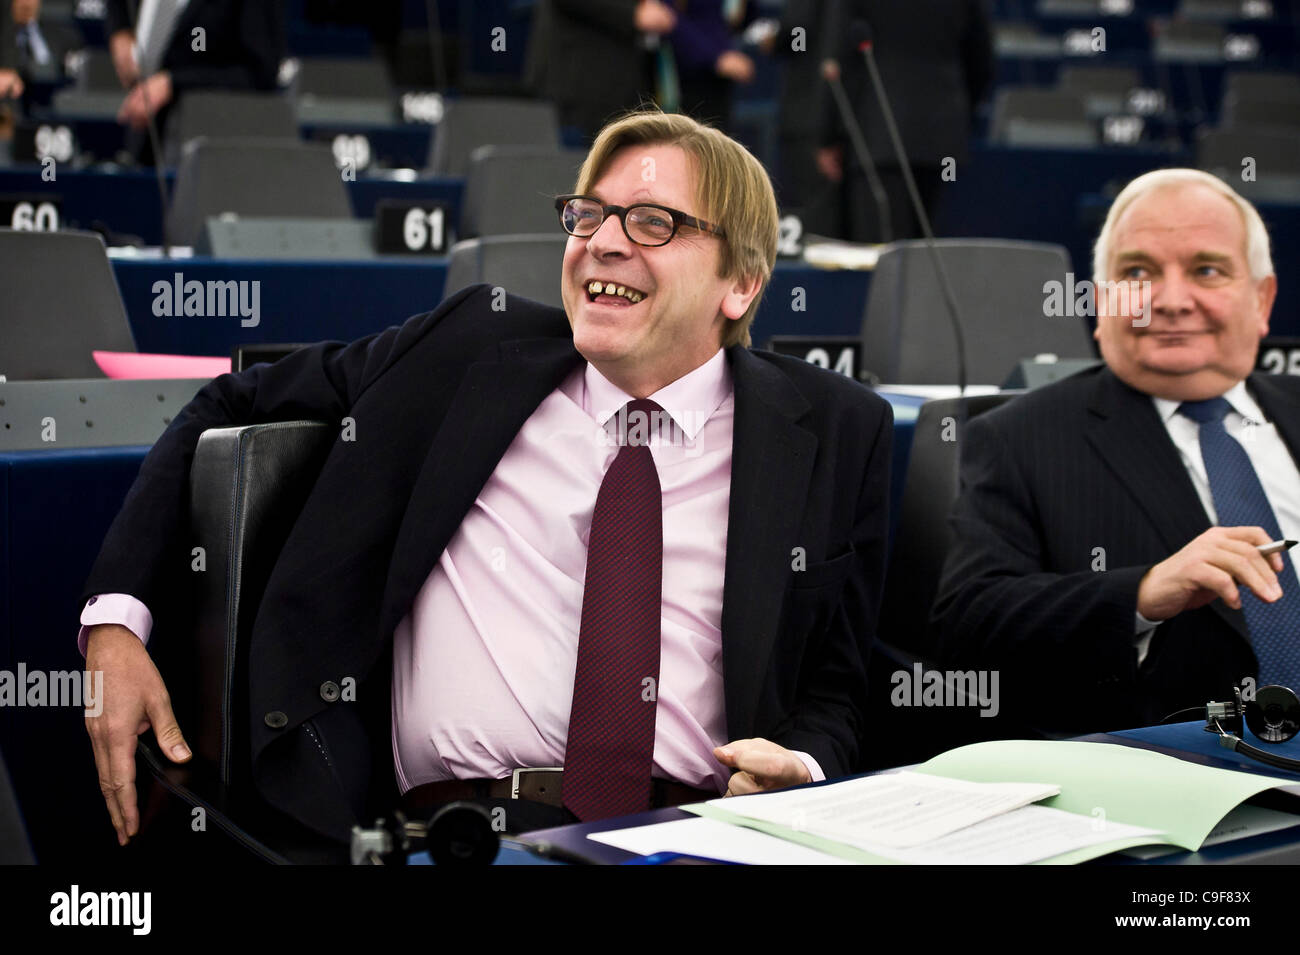 Dec. 13, 2011 - Strasbourg, Alsace, France - Belgian , Member of the European parliament (MEP) president of the Liberl group Guy Maurice Marie Louise Verhofstadt  (L) and Joseph Daul MEP, Chairman of the EPP Group  during the debate on the results of EU Summit  at the European Parliament headquarter Stock Photo